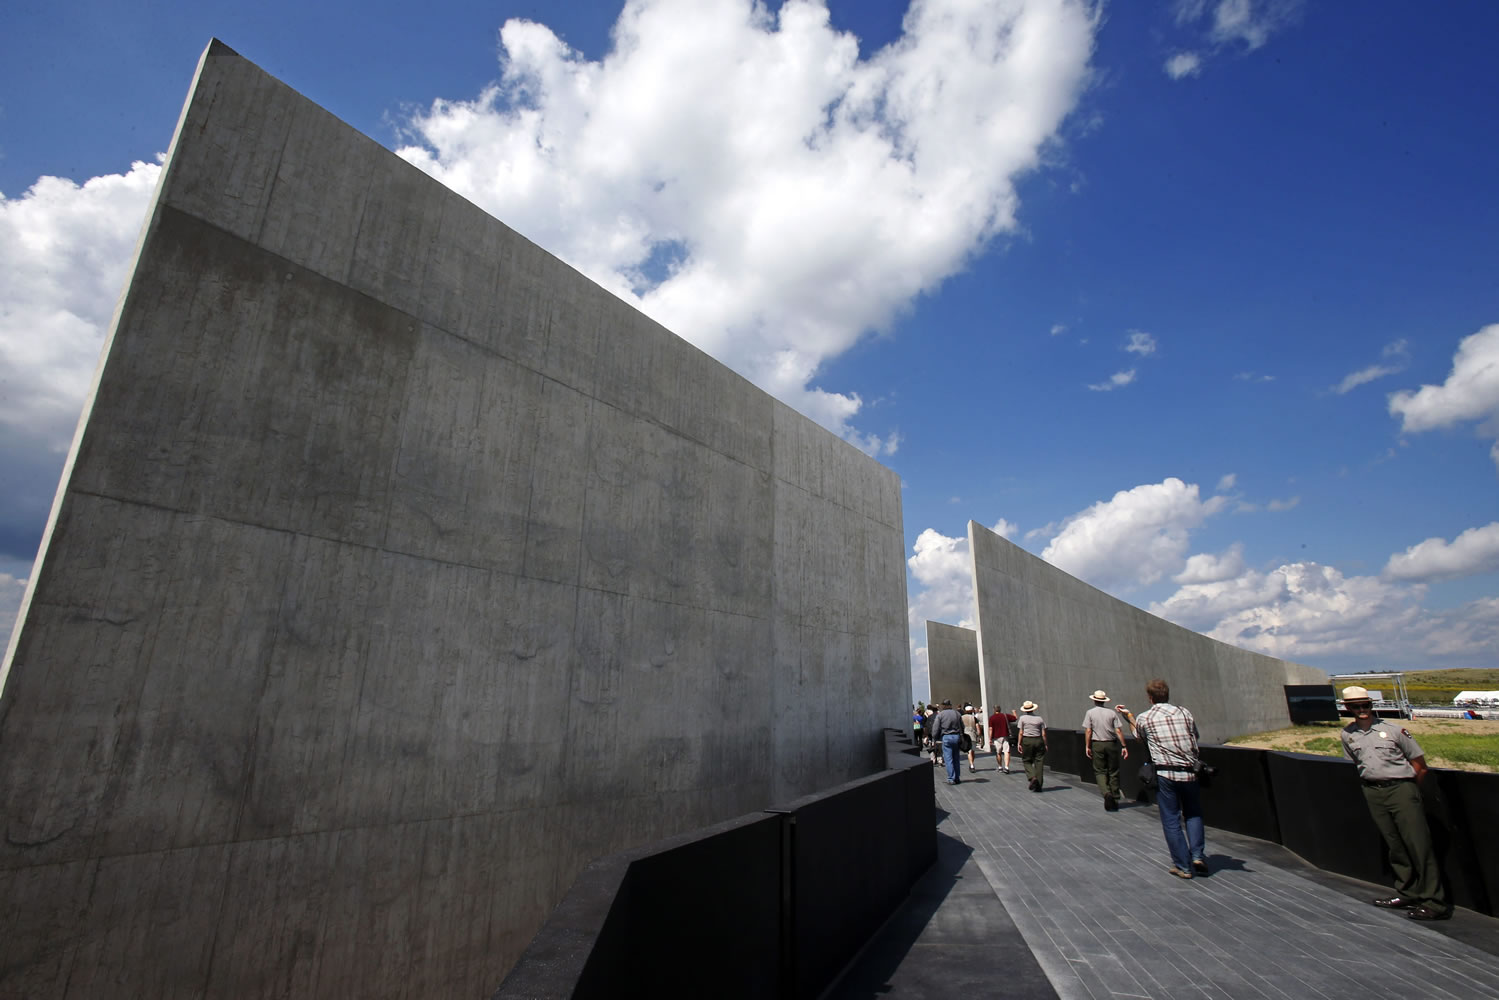 Members of the media get a preview of the the Flight 93 National Memorial visitors center complex in Shanksville, Pa., Wednesday, Sept. 9, 2015. The visitors center will be formally dedicated and open to the public on Sept. 10, 2015. (AP Photo/Gene J.